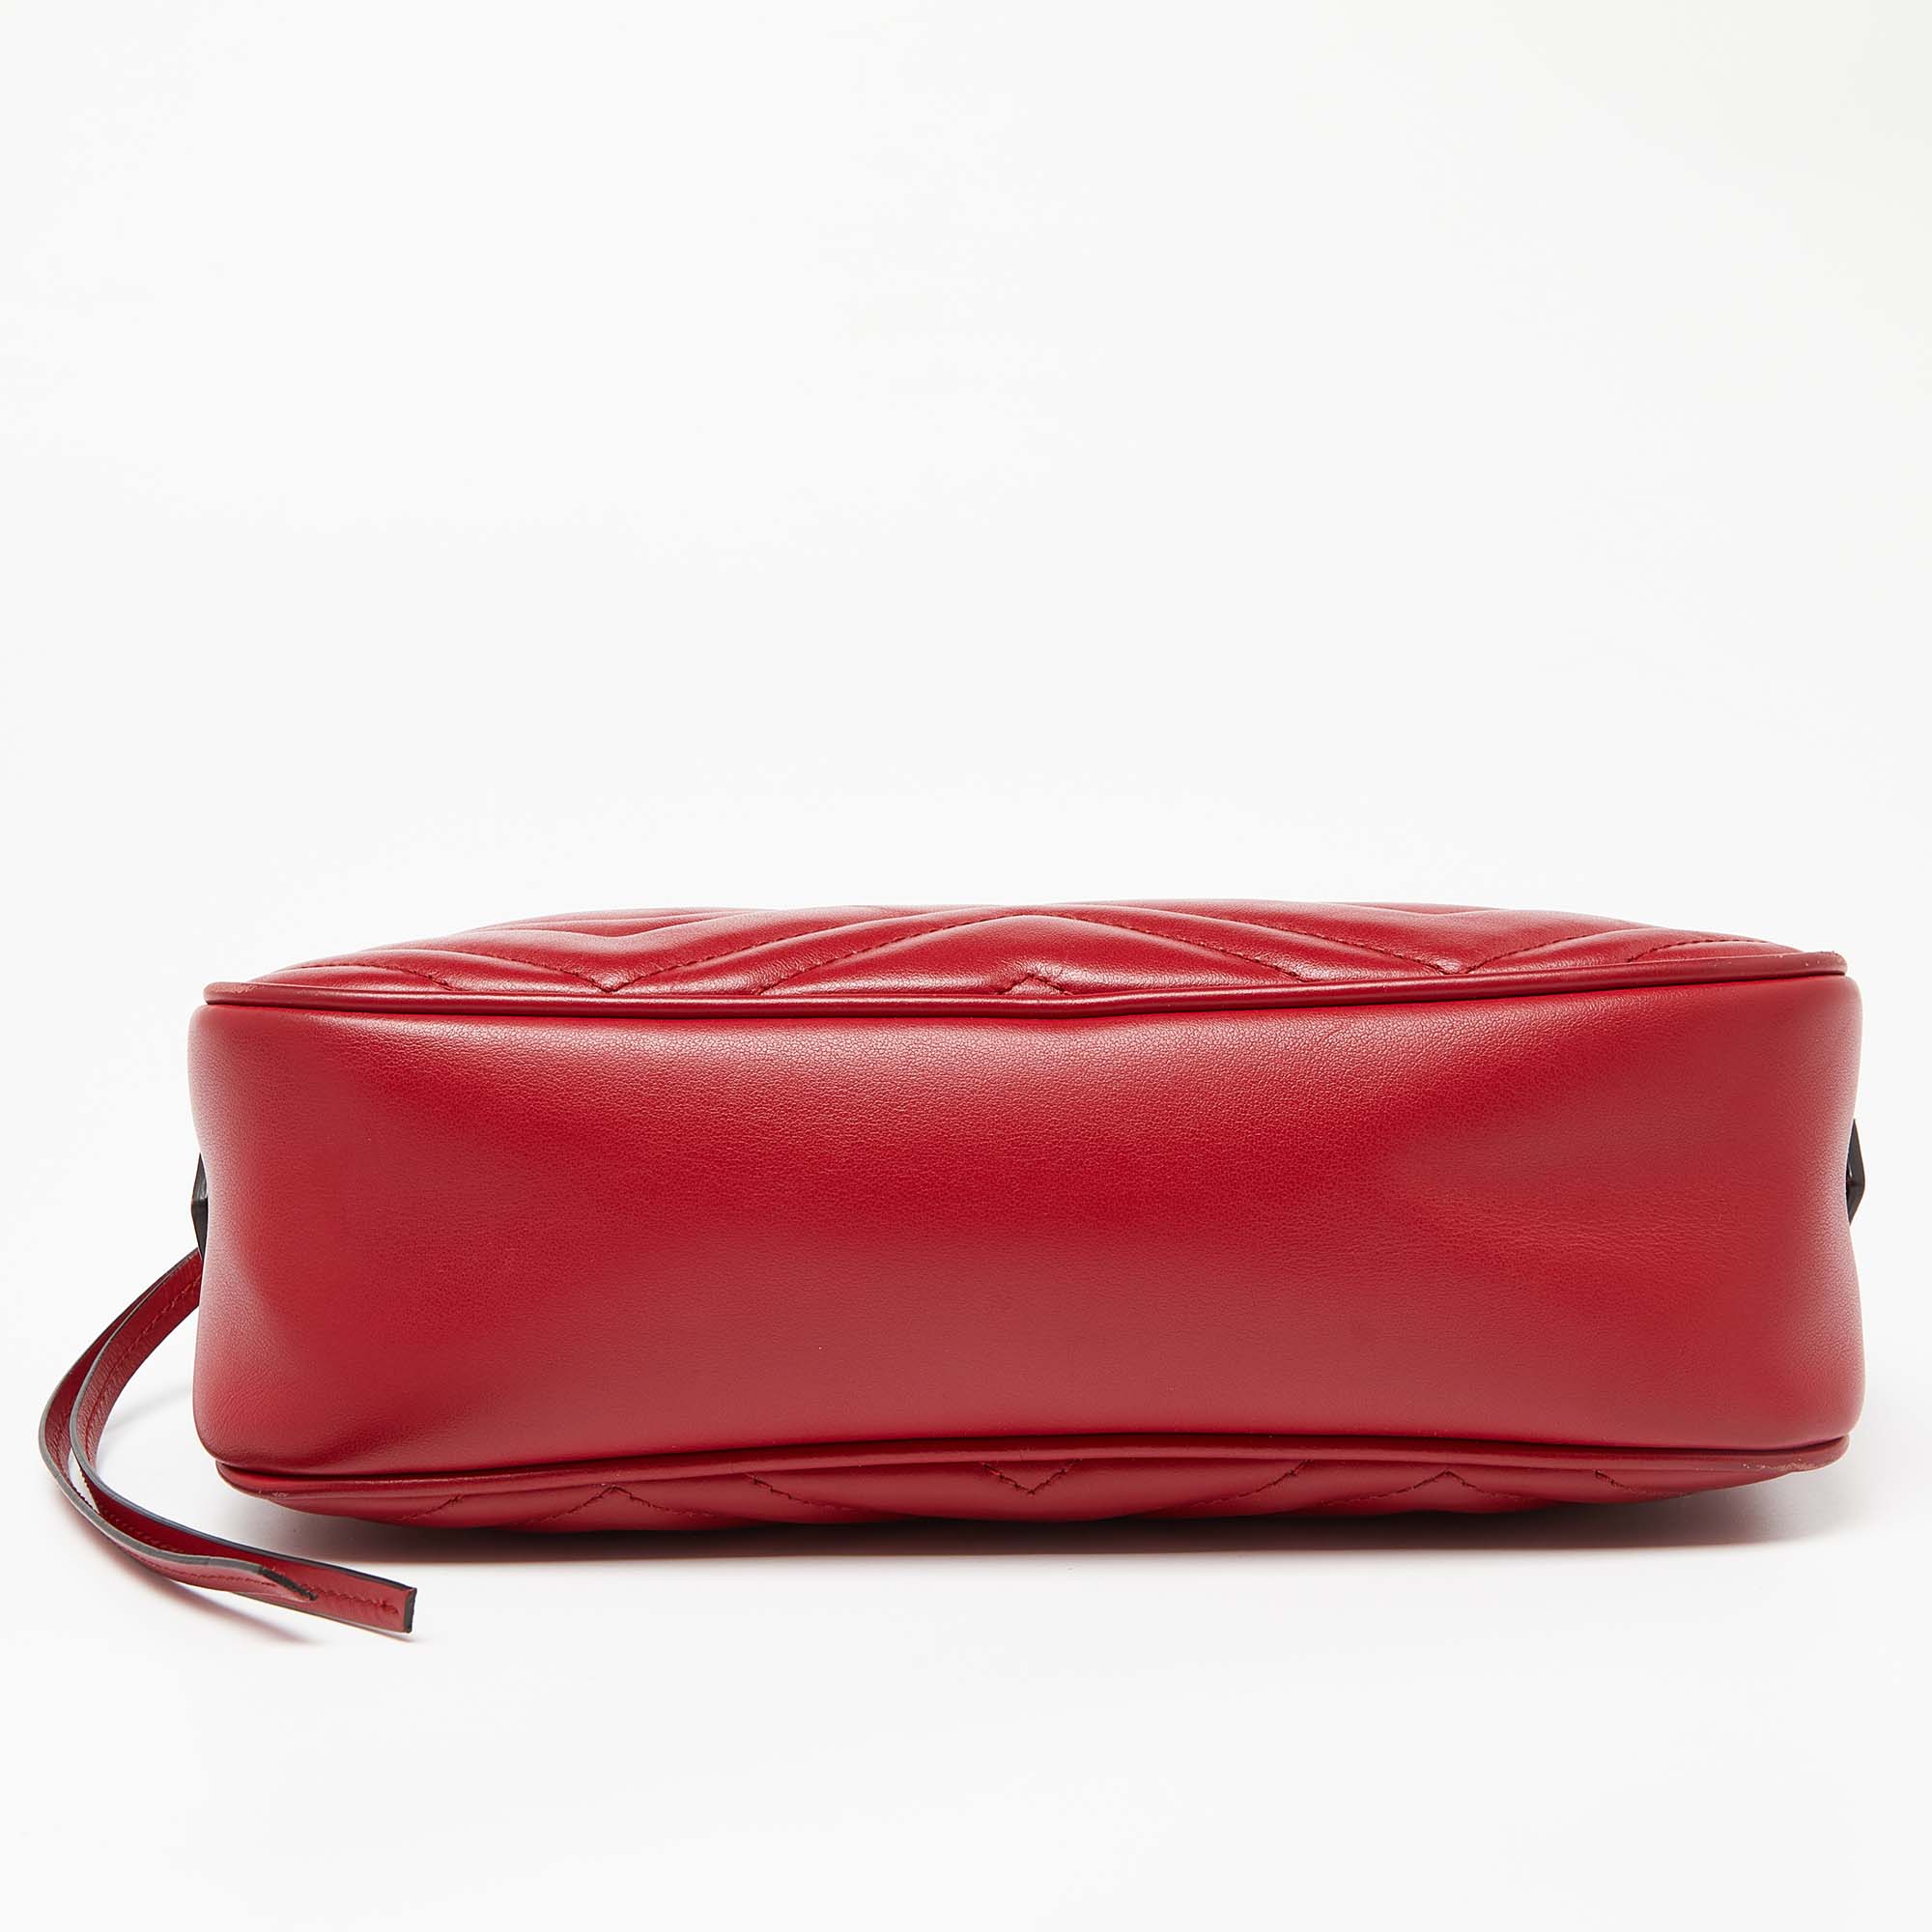 Gucci Red Matelassé Leather Small GG Marmont Shoulder Bag